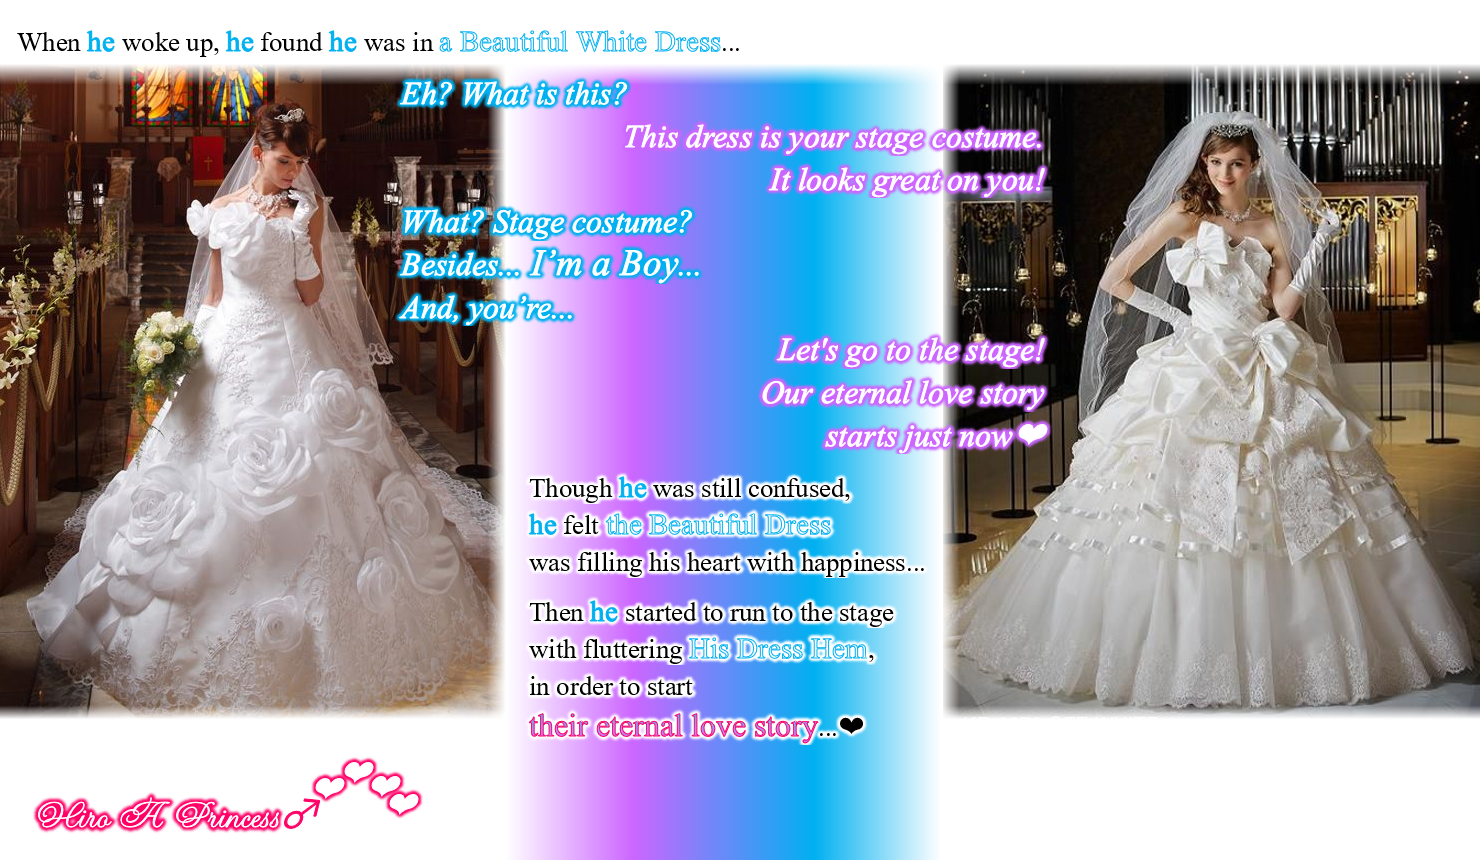 The boys eternal love story starts with his beautiful white dress 2E